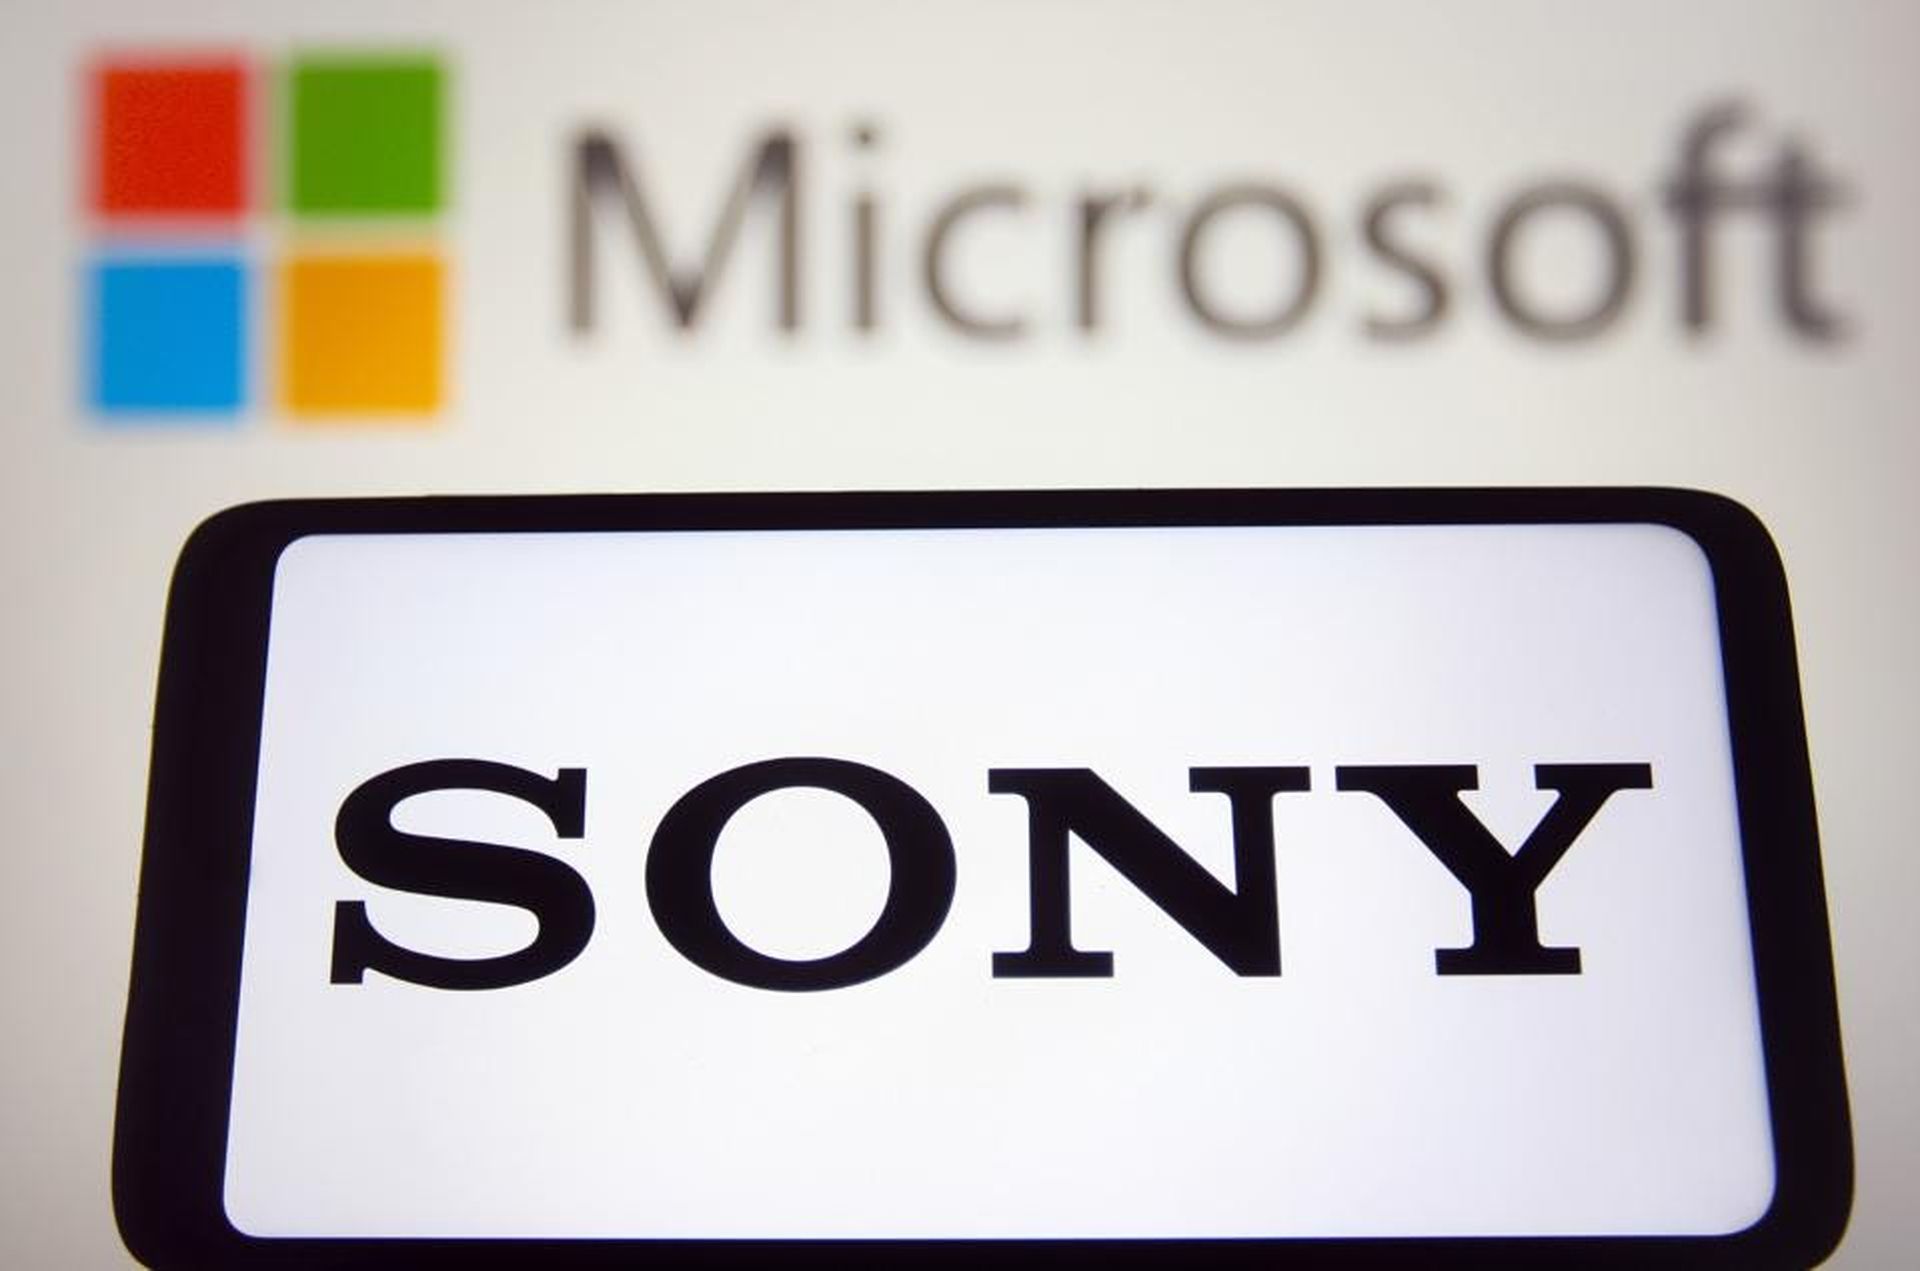 Microsoft accuses Sony of preventing games from coming to Game Pass in an effort to hinder its growth in the gaming industry.